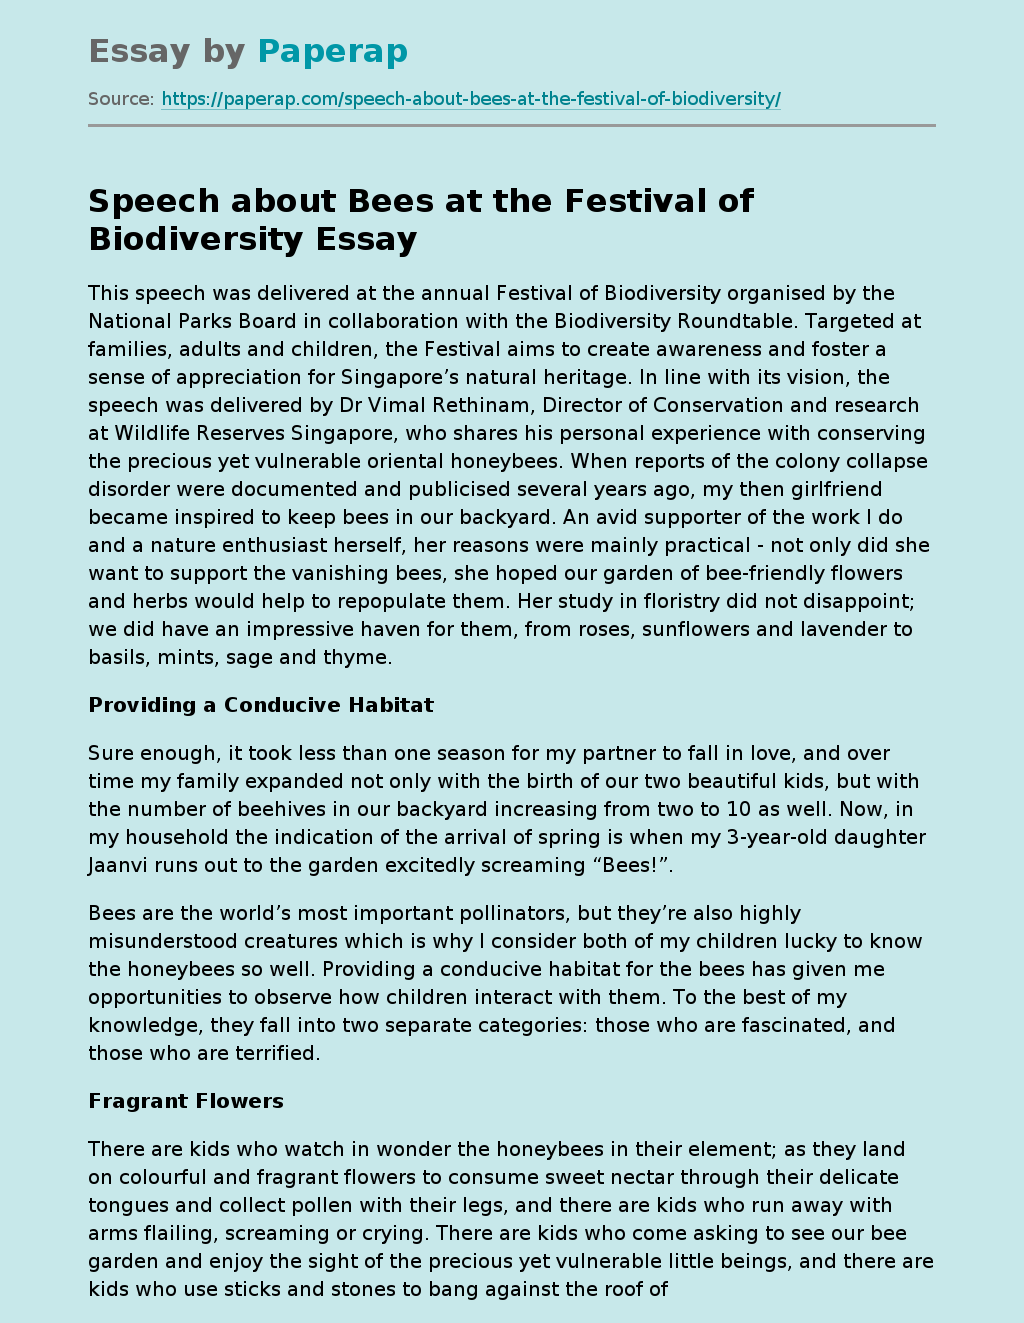 Speech about Bees at the Festival of Biodiversity